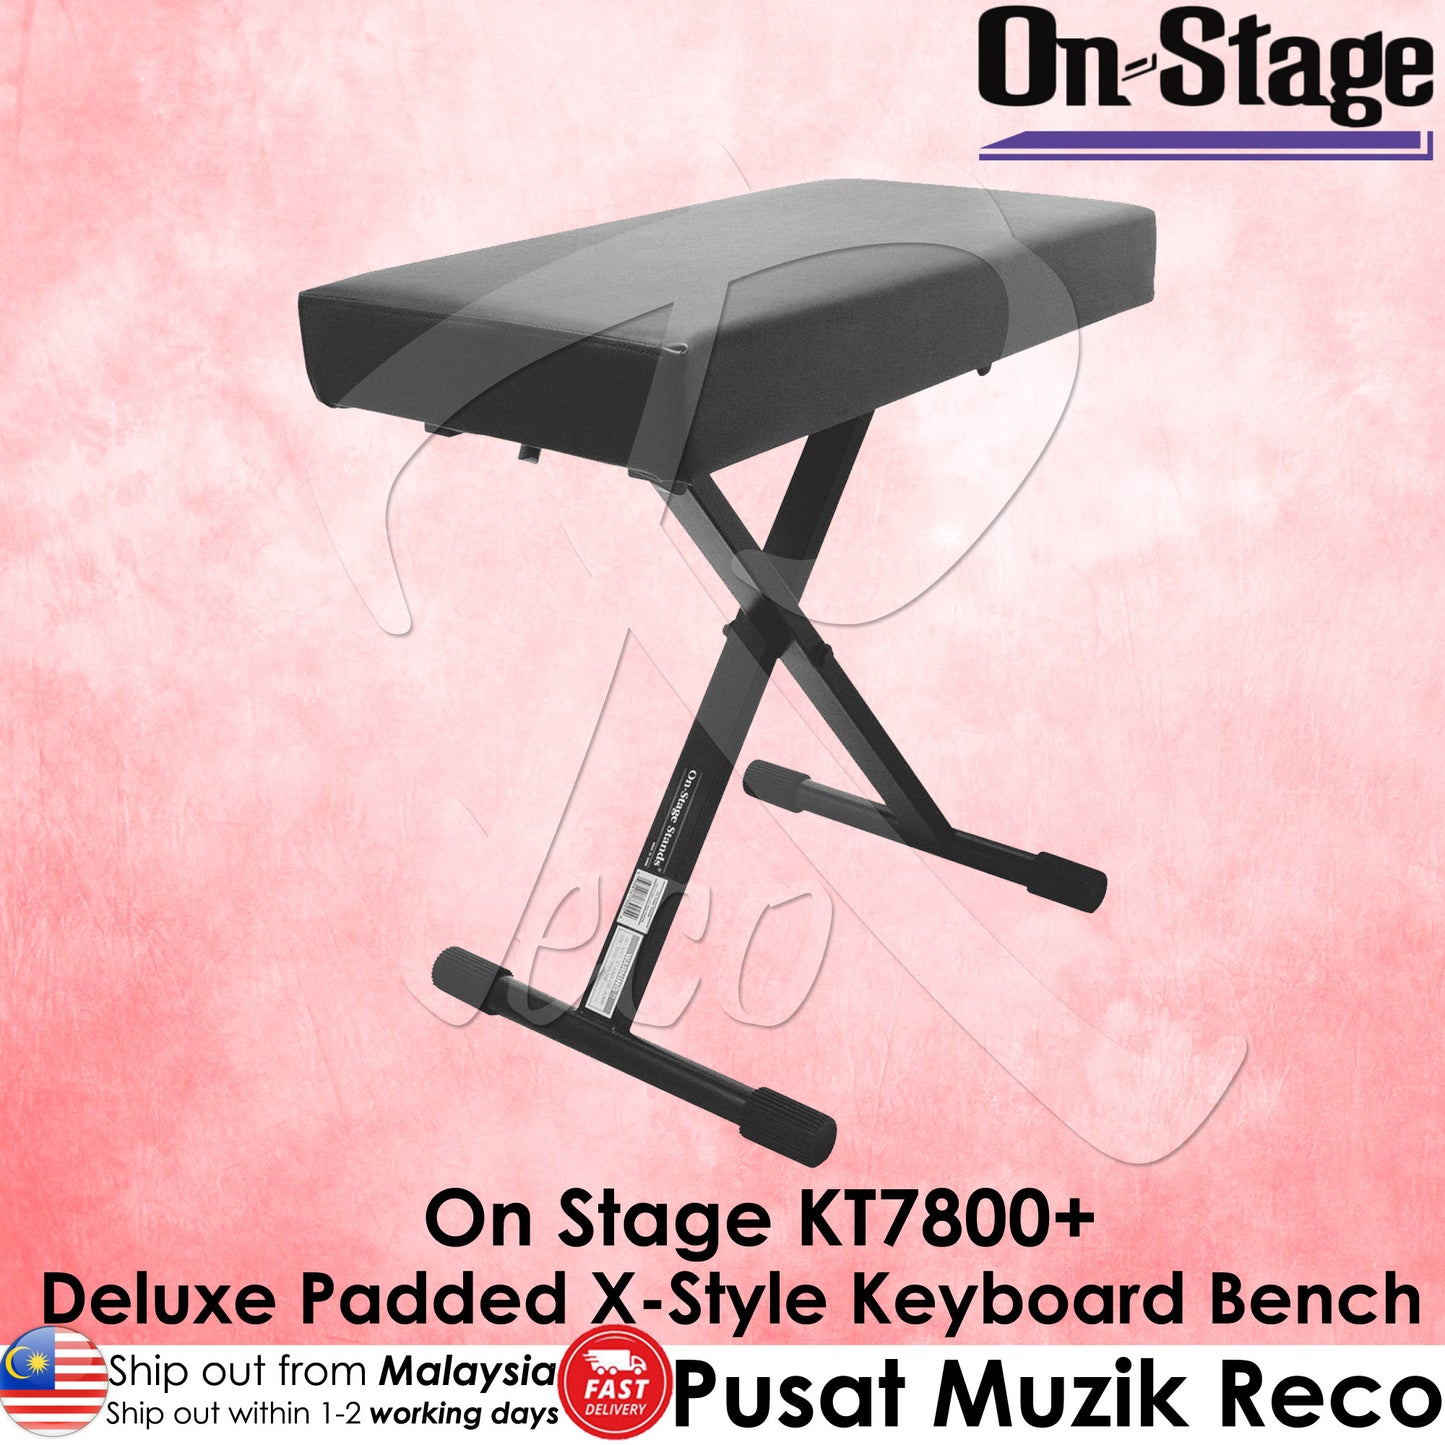 On Stage KT7800+ Deluxe Padded X-Style Keyboard Bench - Reco Music Malaysia